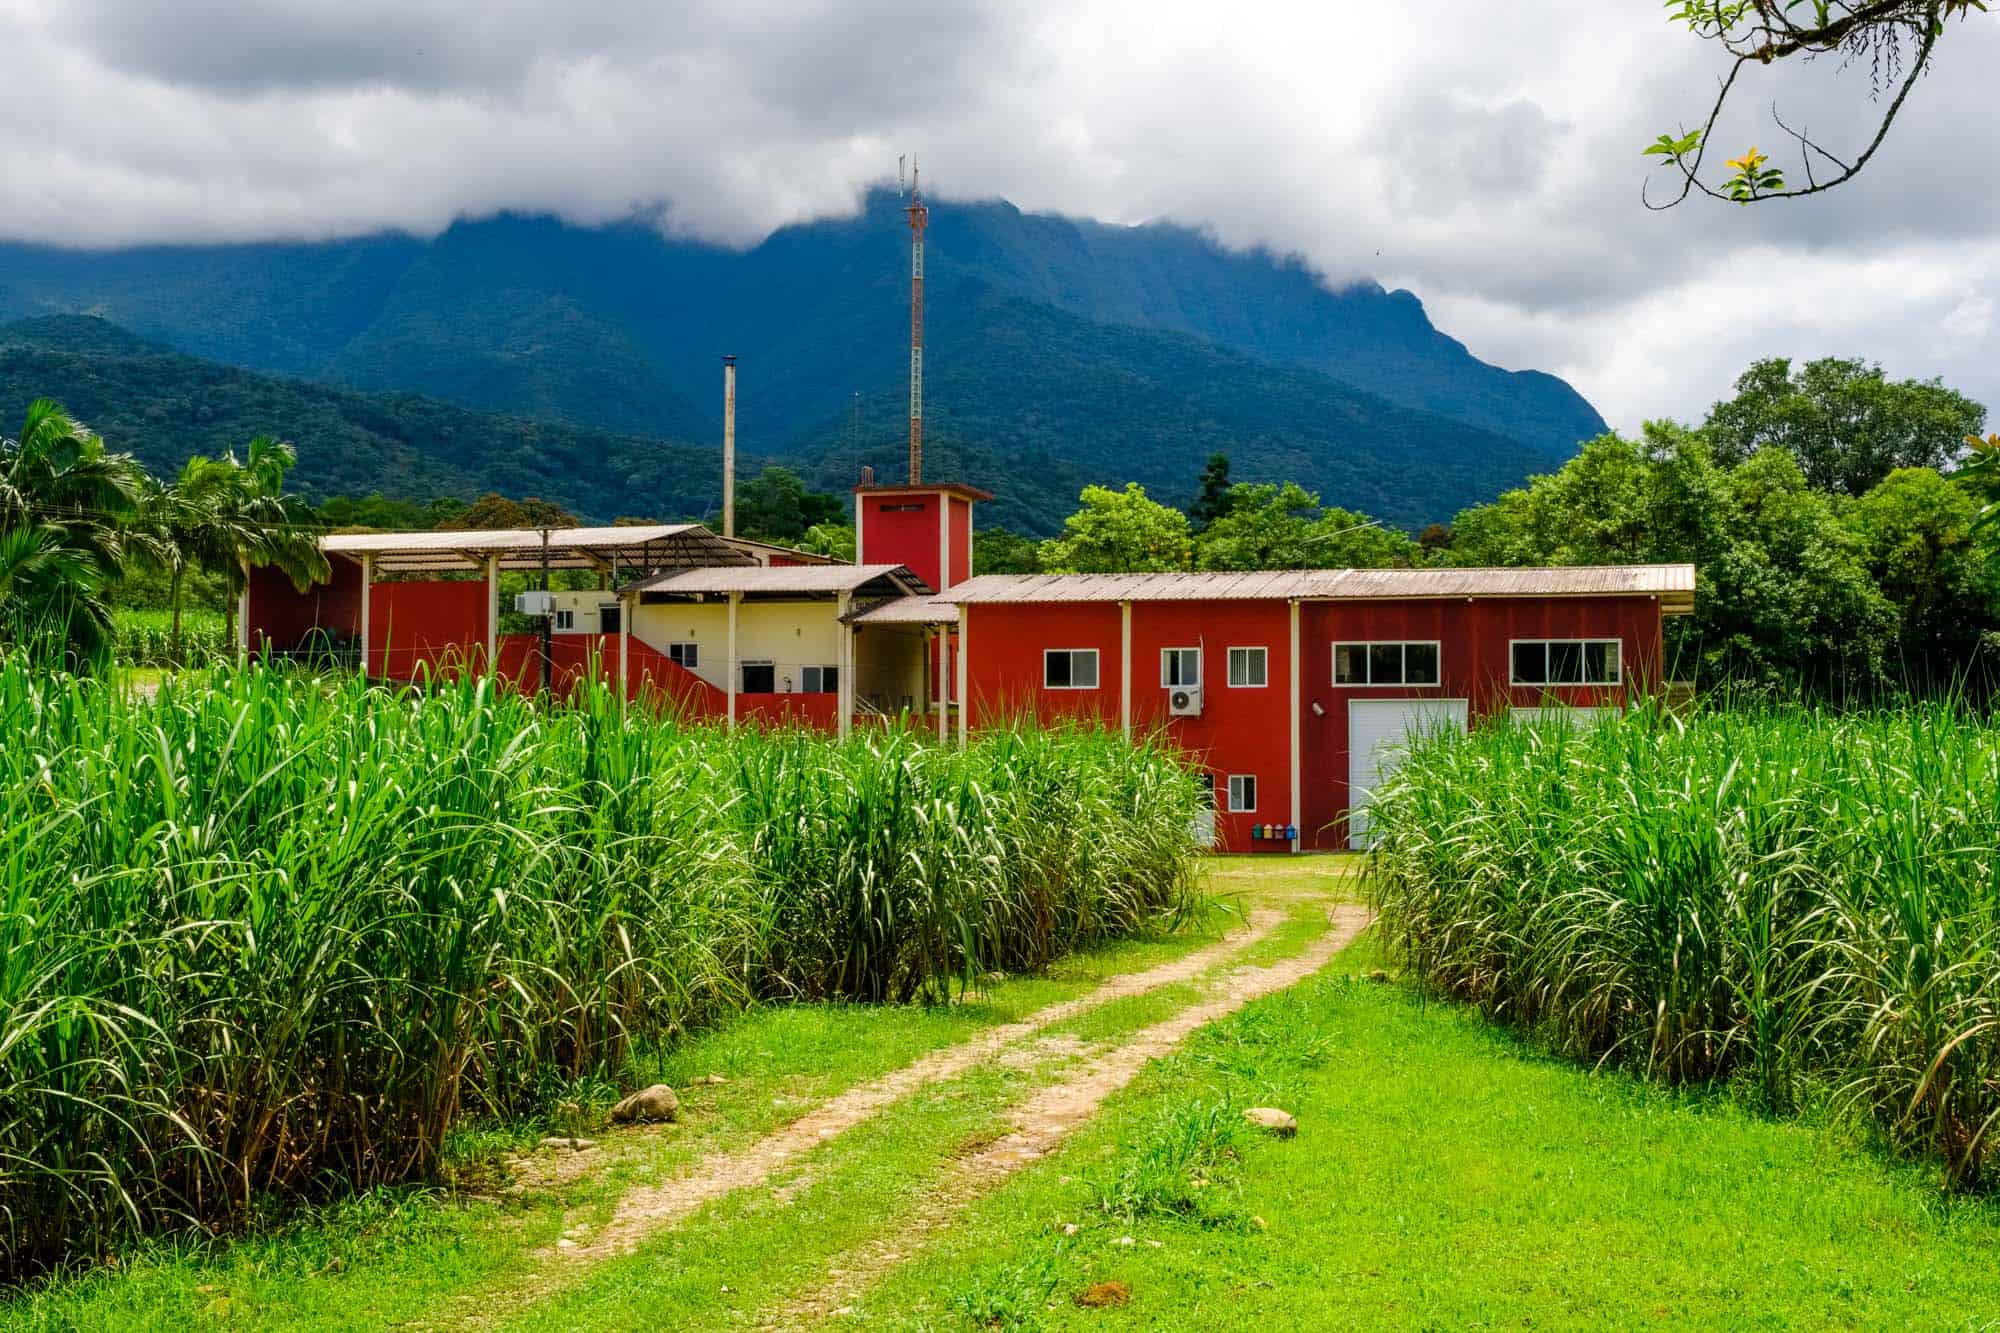 cane field with red building and mountains in background